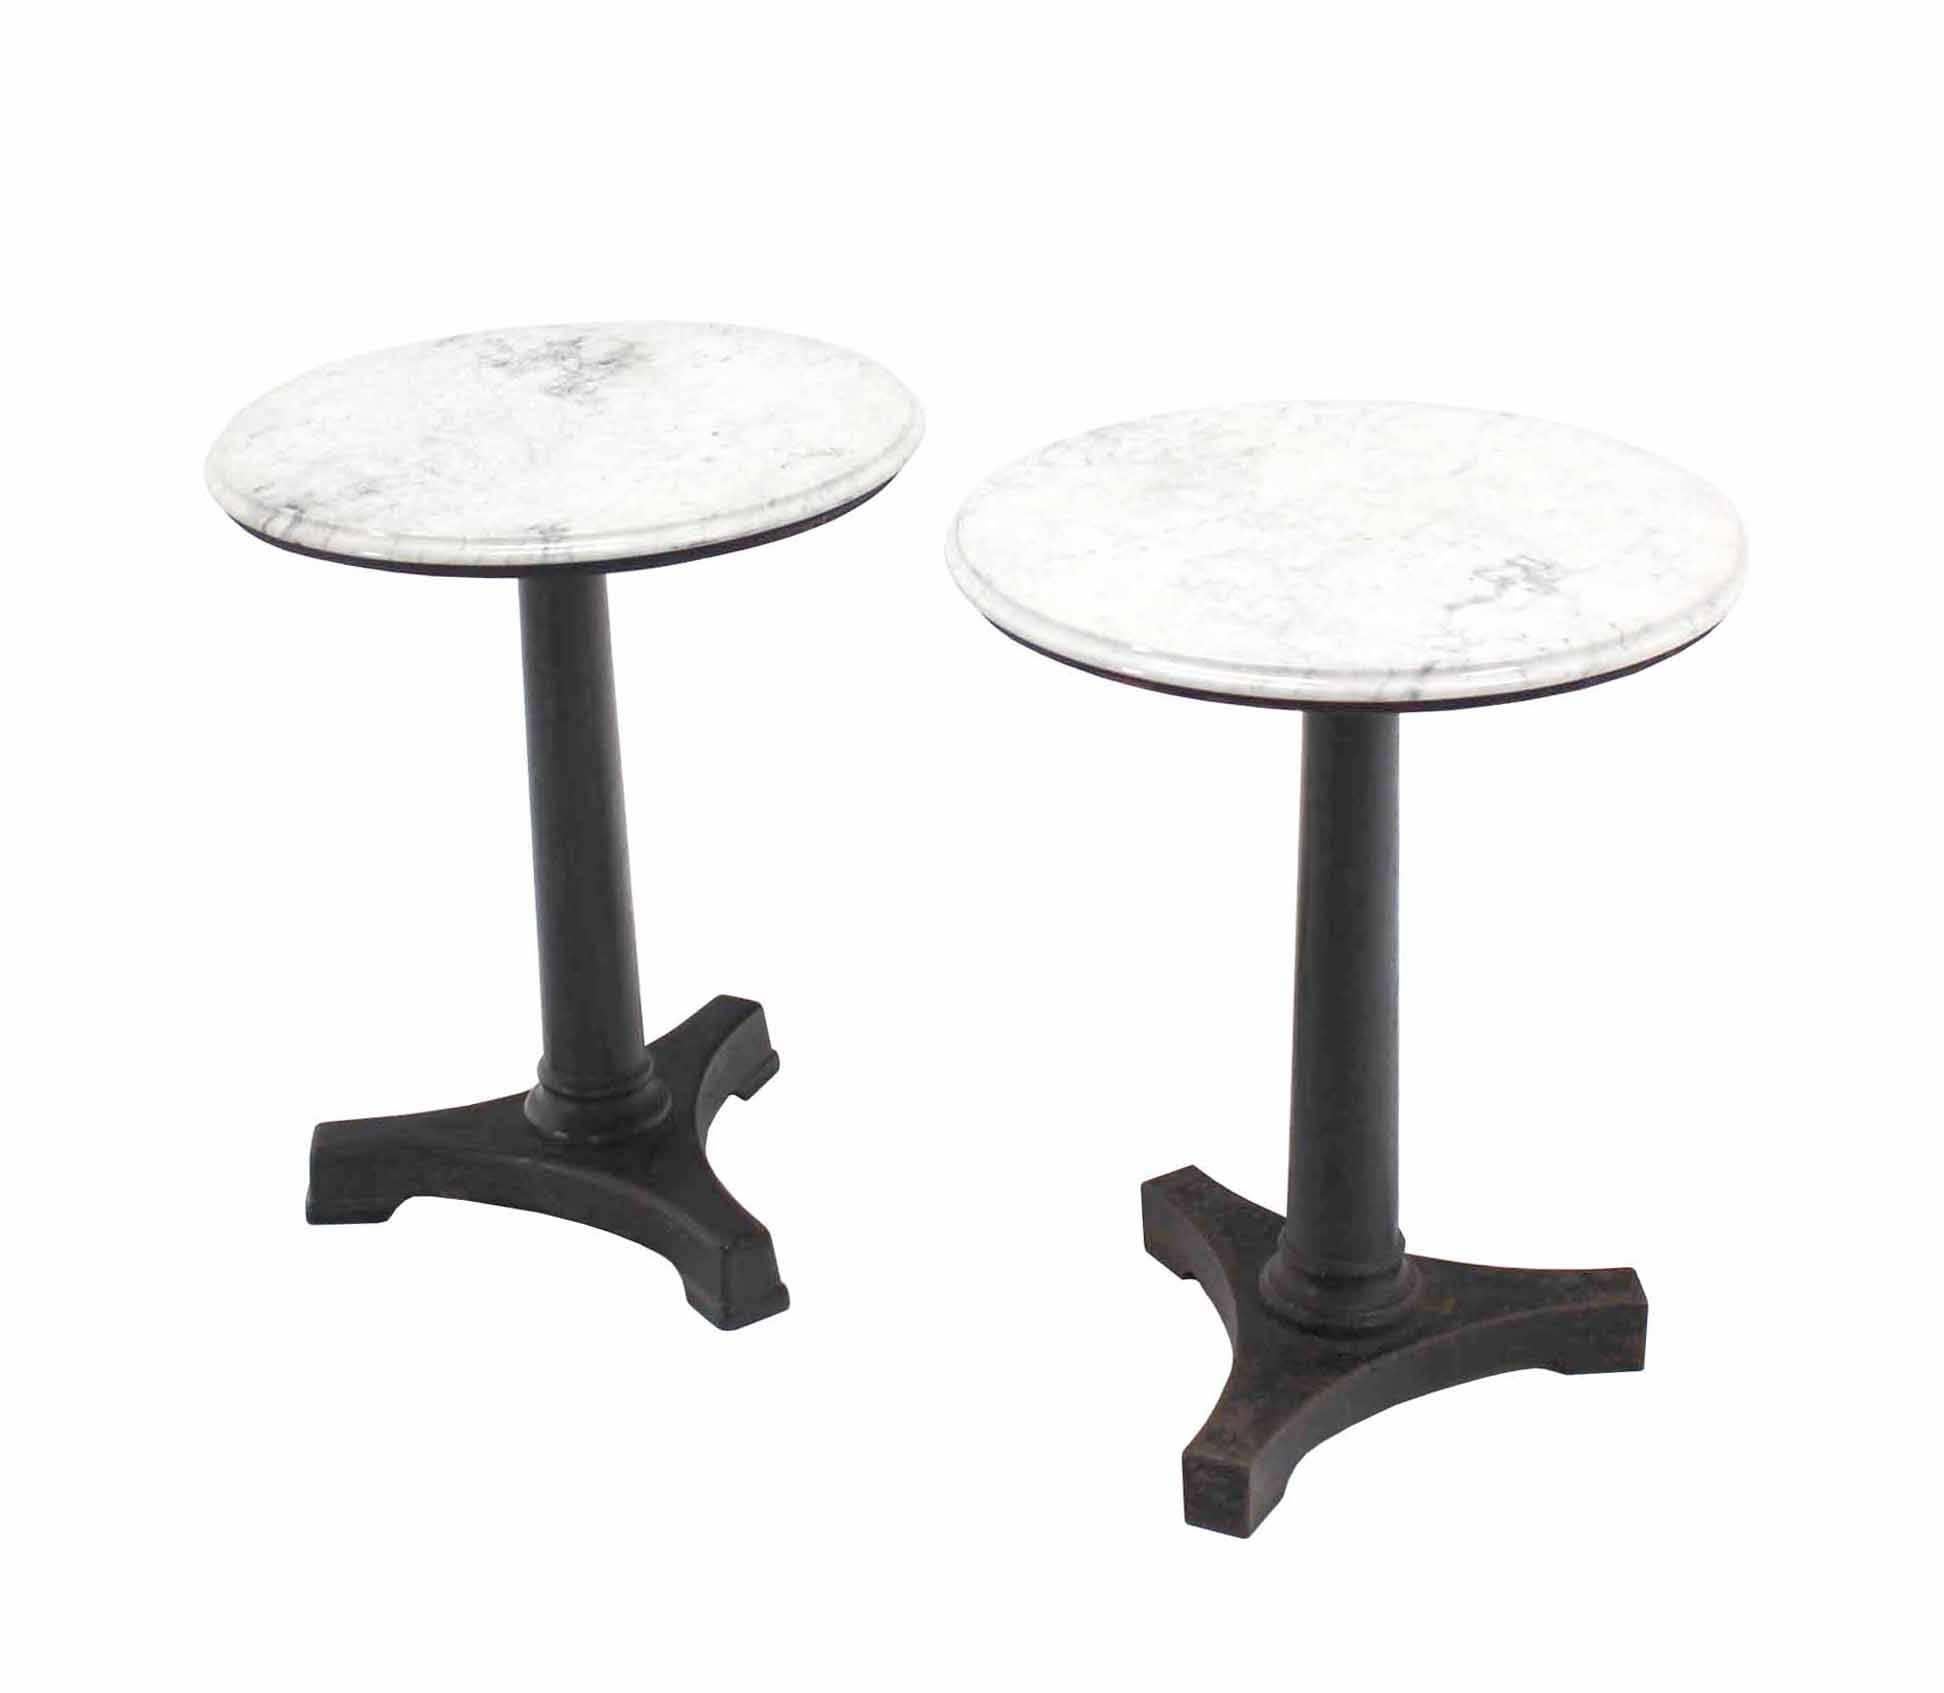 20th Century Pair of Heavy Cast Iron Round Marble-Tops Cafe Tables